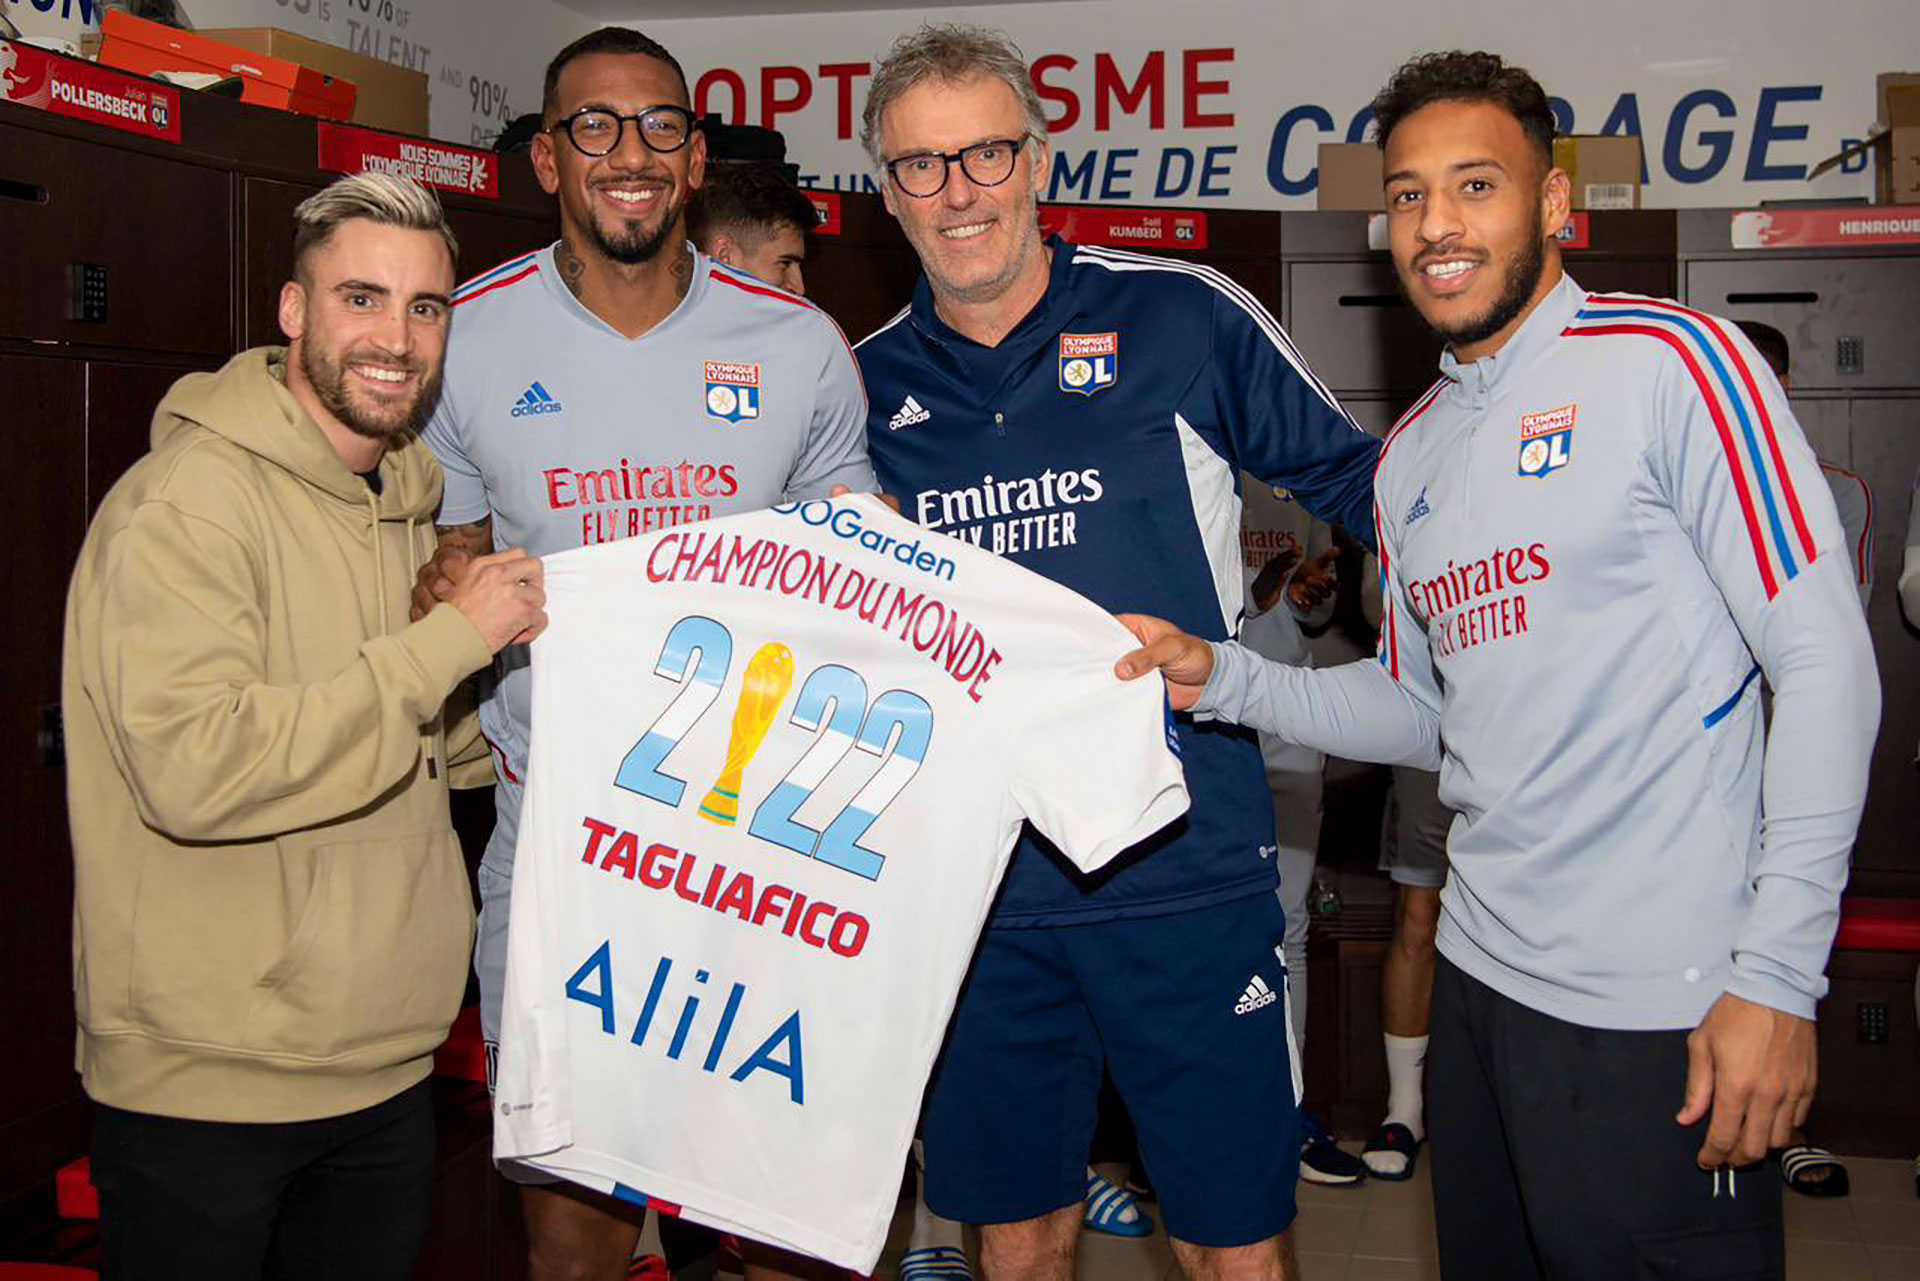 Nicolás Tagliafico receives his tribute as world champion in Lyon together with the team's coach, Laurent Blanc (mid), Jerome Boateng and Corentin Tolisso.  Everyone lifted the trophy (Lyon)